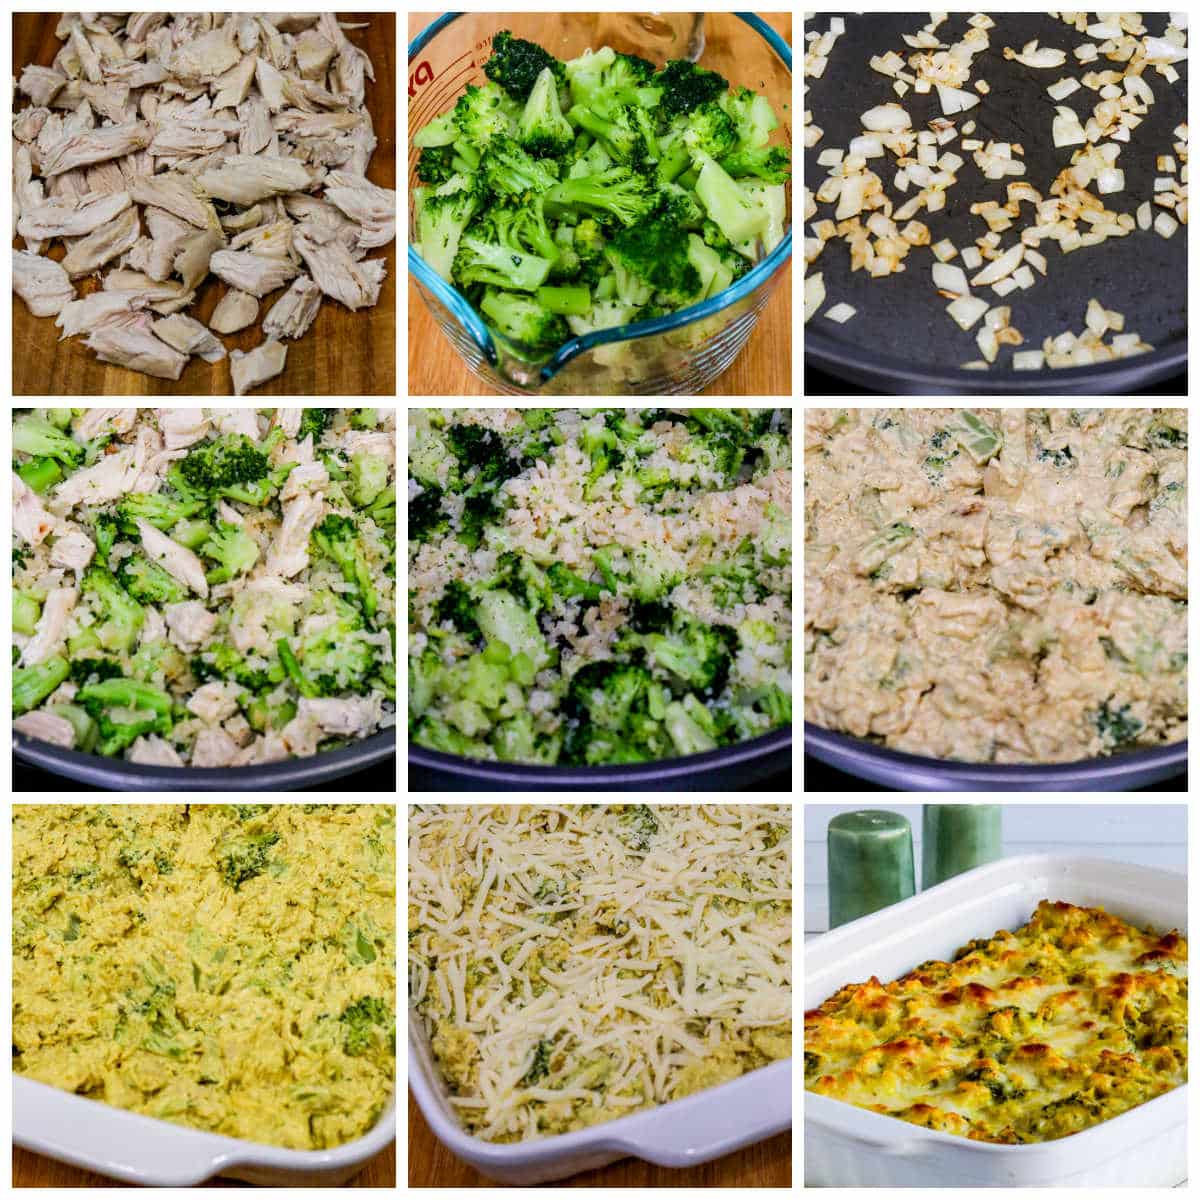 Chicken, Broccoli, Curry Casserole with Cauliflower Rice collage photo of recipe steps.